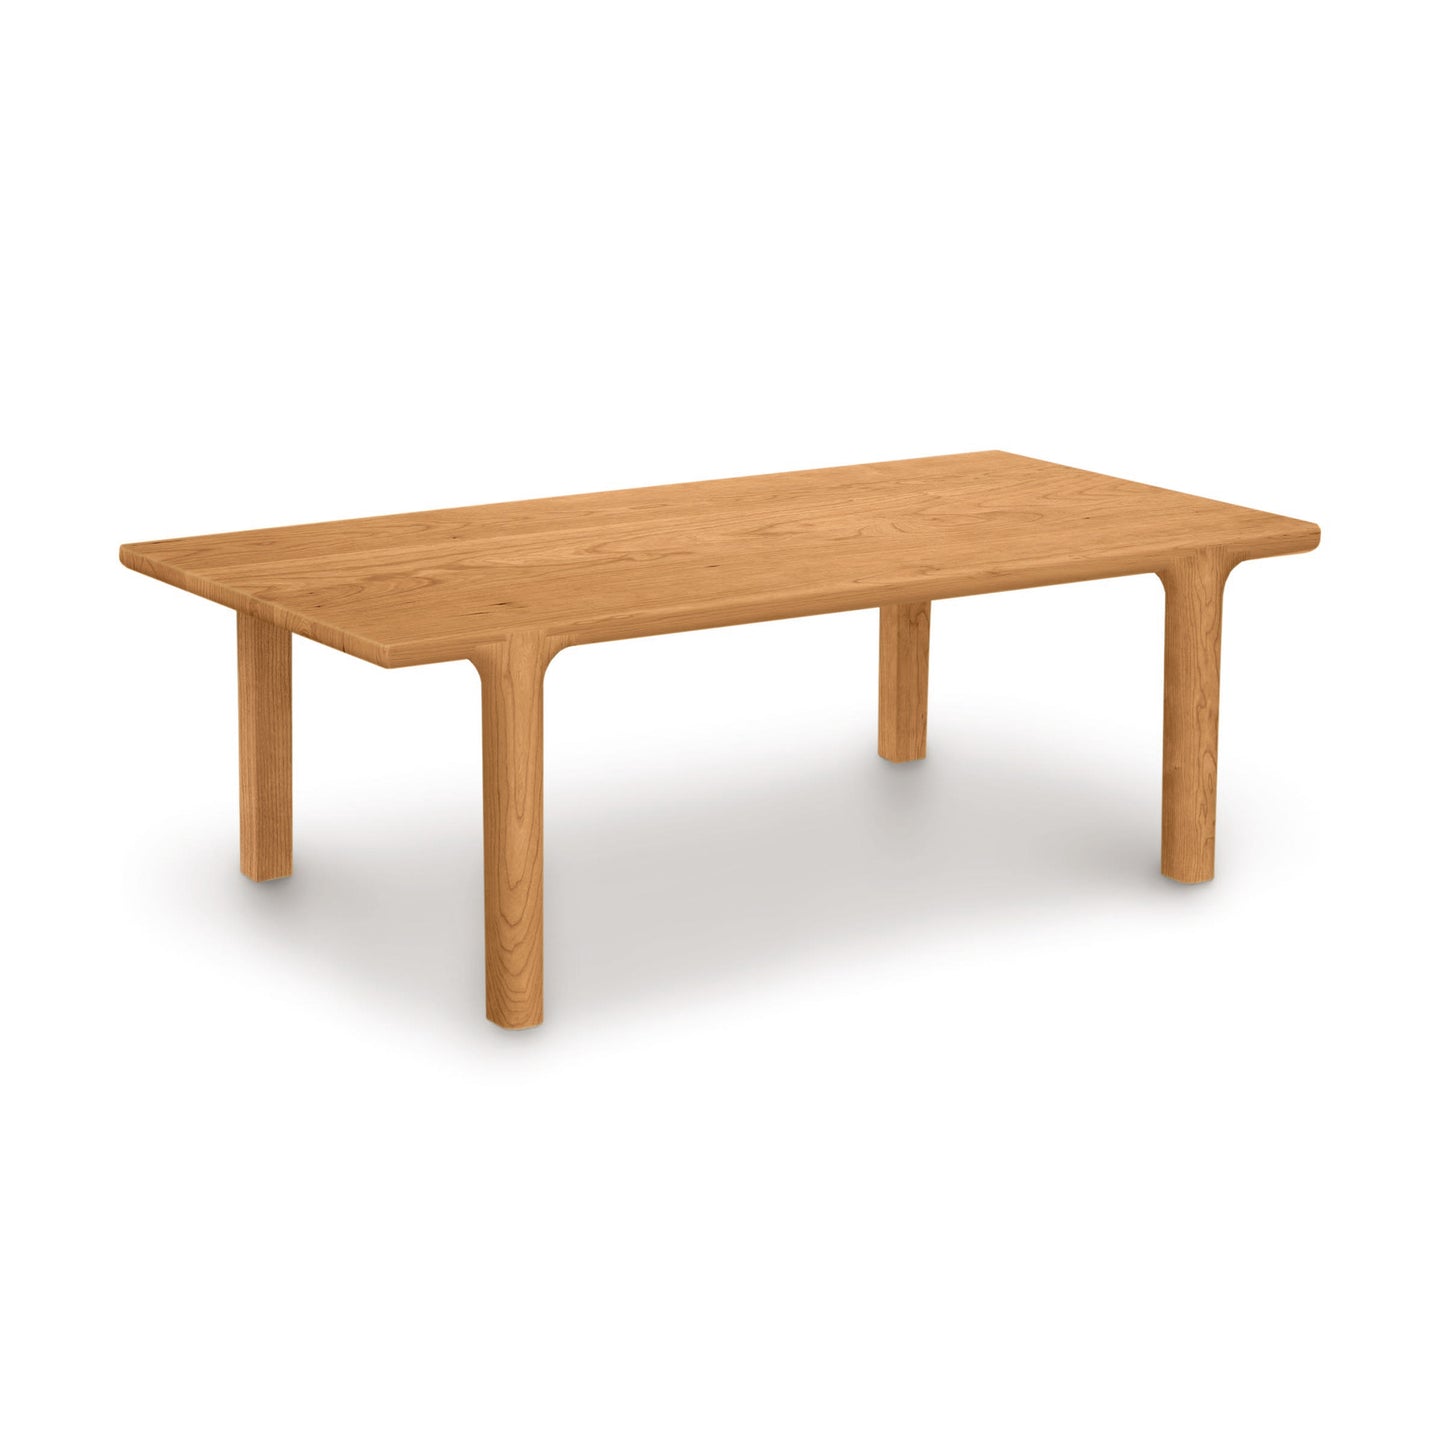 A Copeland Furniture Sierra Rectangular Coffee Table, crafted from solid North American hardwood, with four legs on a white background.